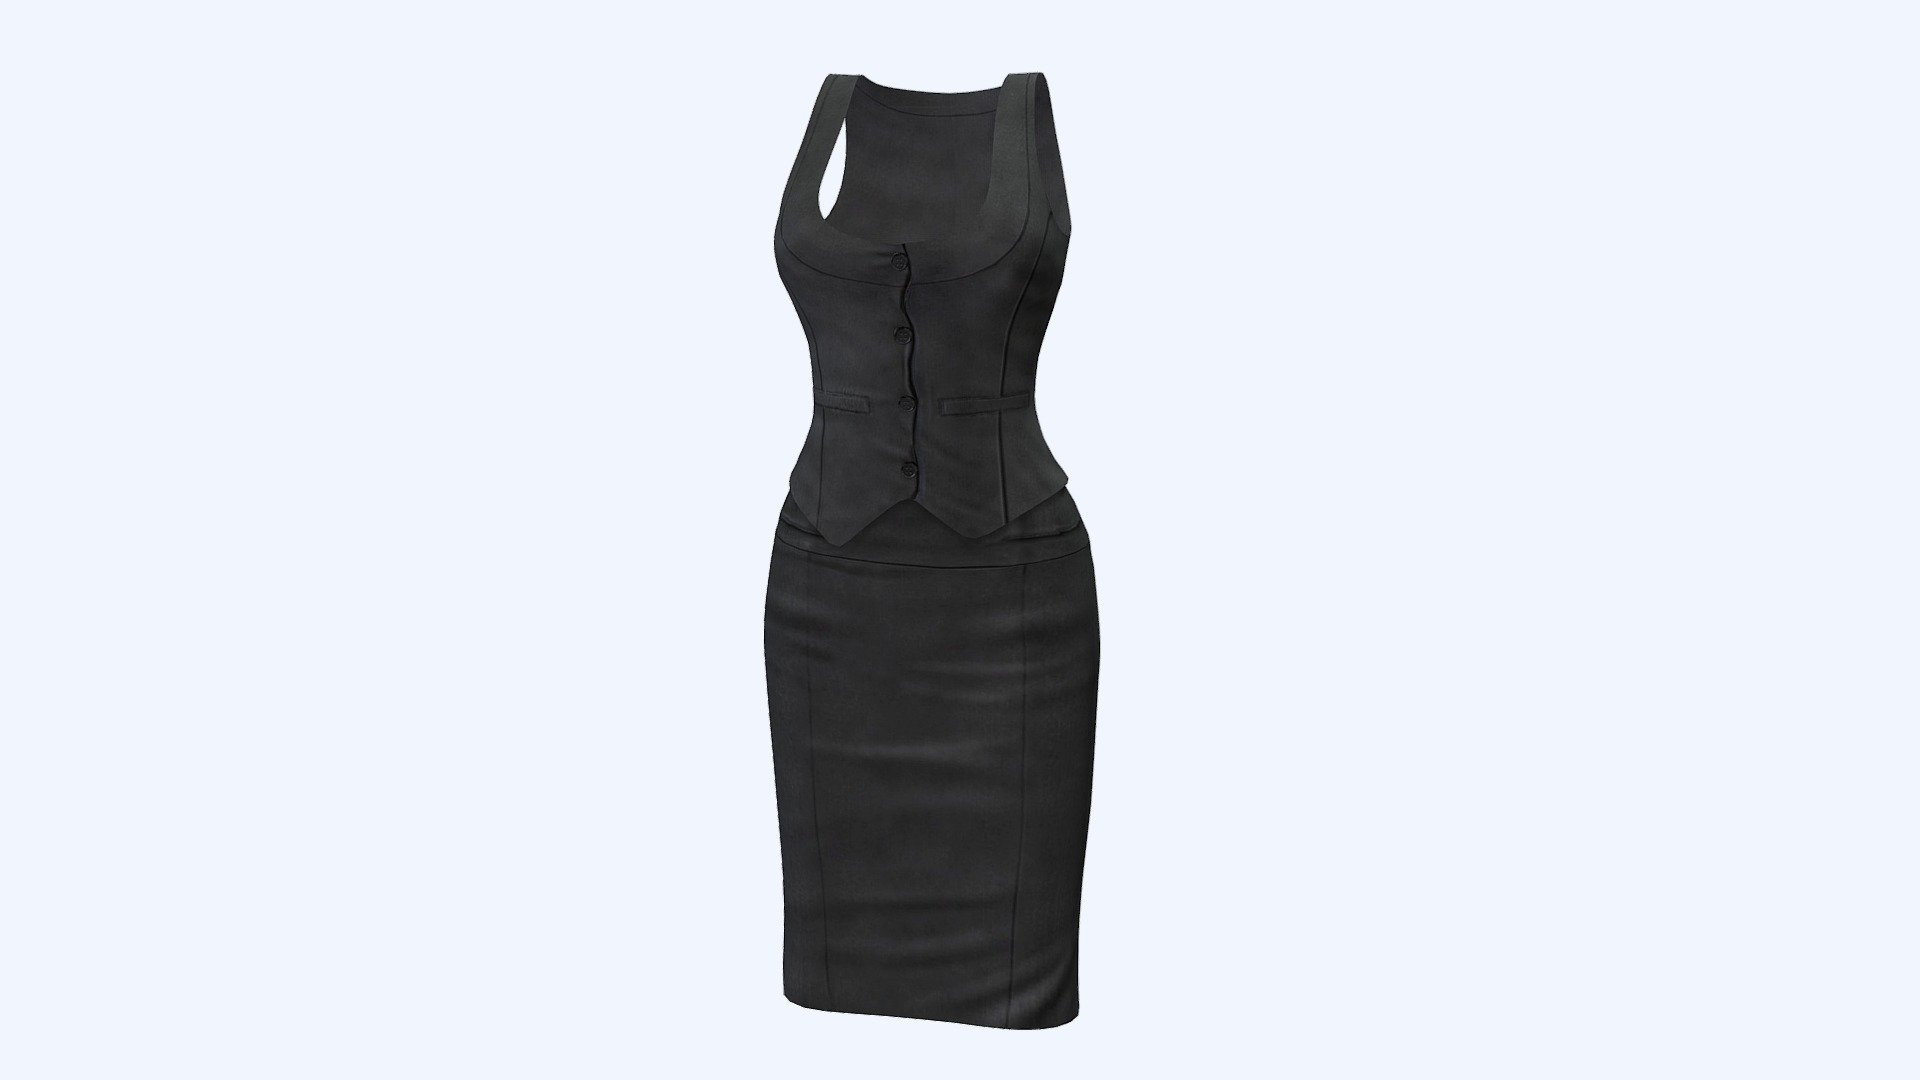 Female Pencil Skirt Vest Formal Business Outfit - Buy Royalty Free 3D ...